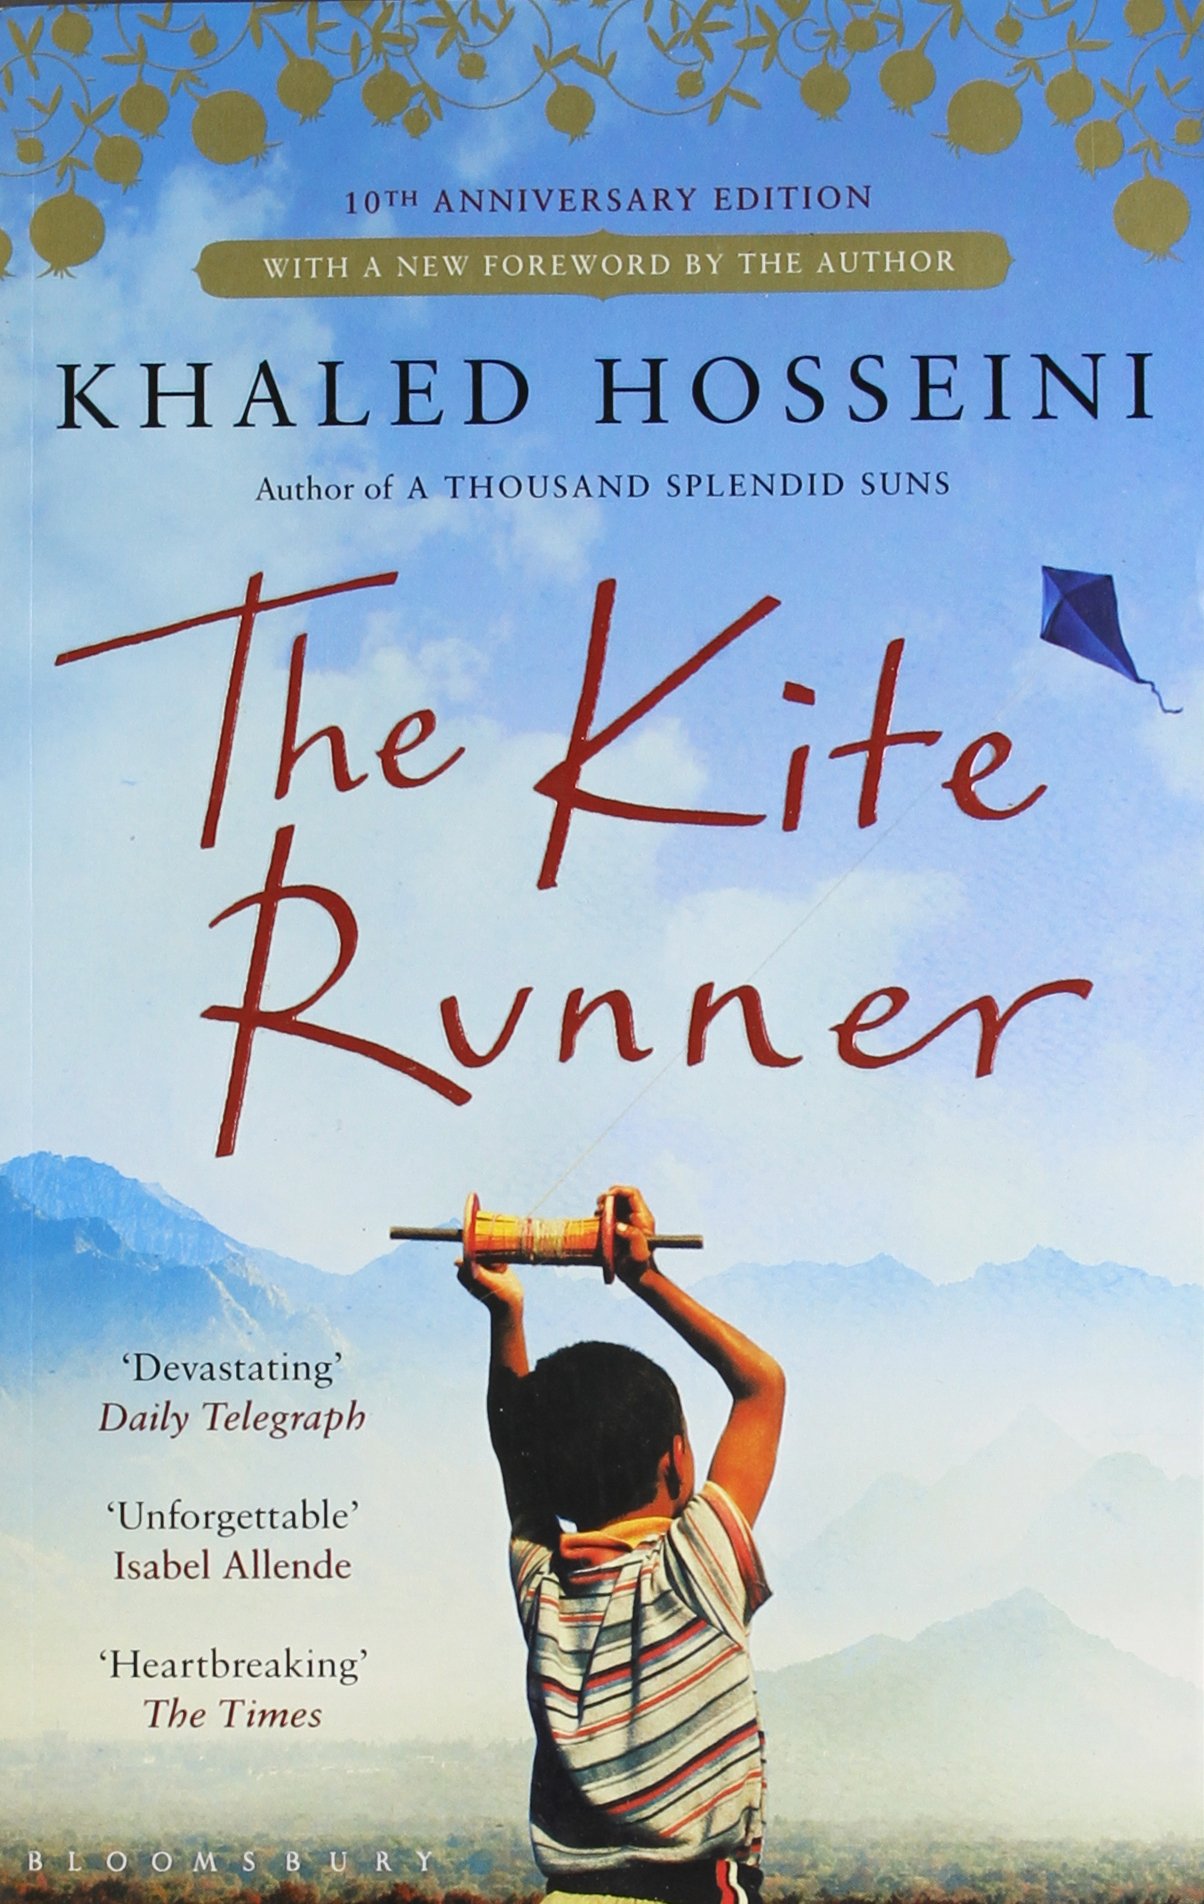 The Kite Runner by Khaled Hosseini Book Review